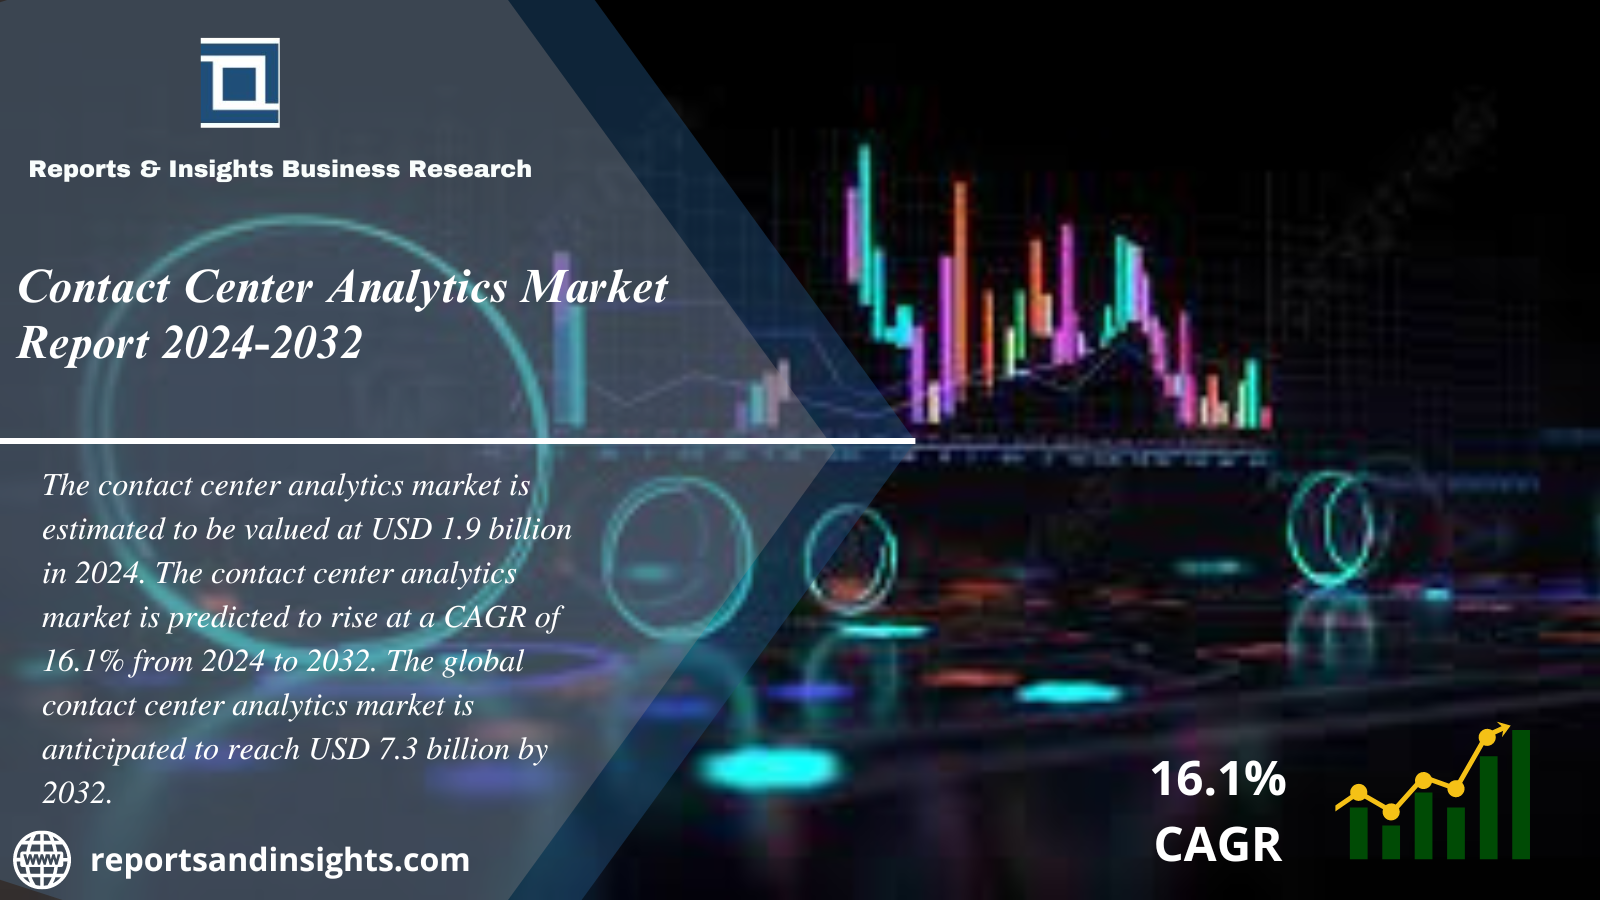 Contact Center Analytics Market Size, Share, Growth, Trends, and Forecast 2024 to 2032